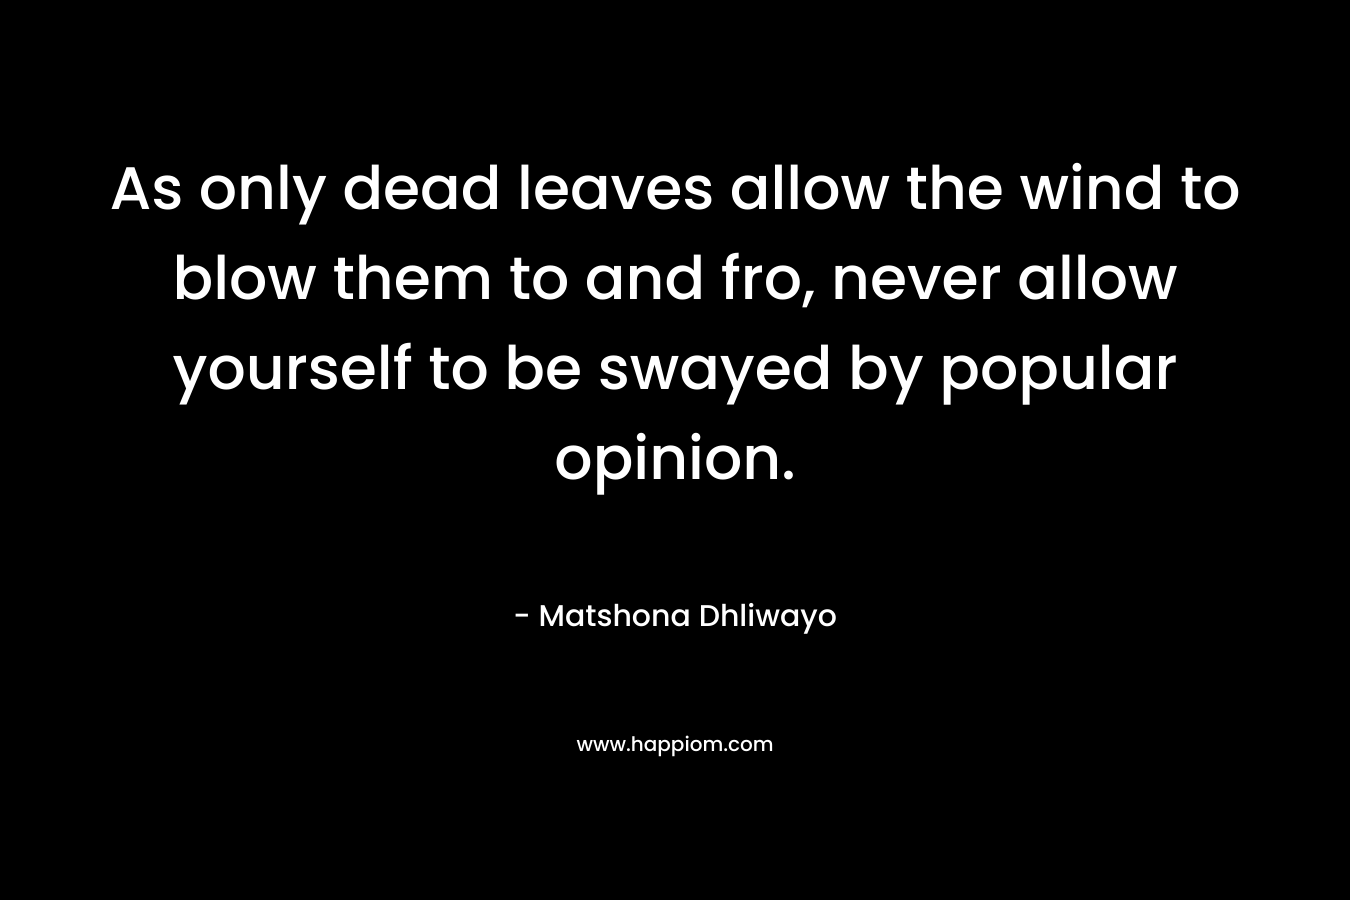 As only dead leaves allow the wind to blow them to and fro, never allow yourself to be swayed by popular opinion.